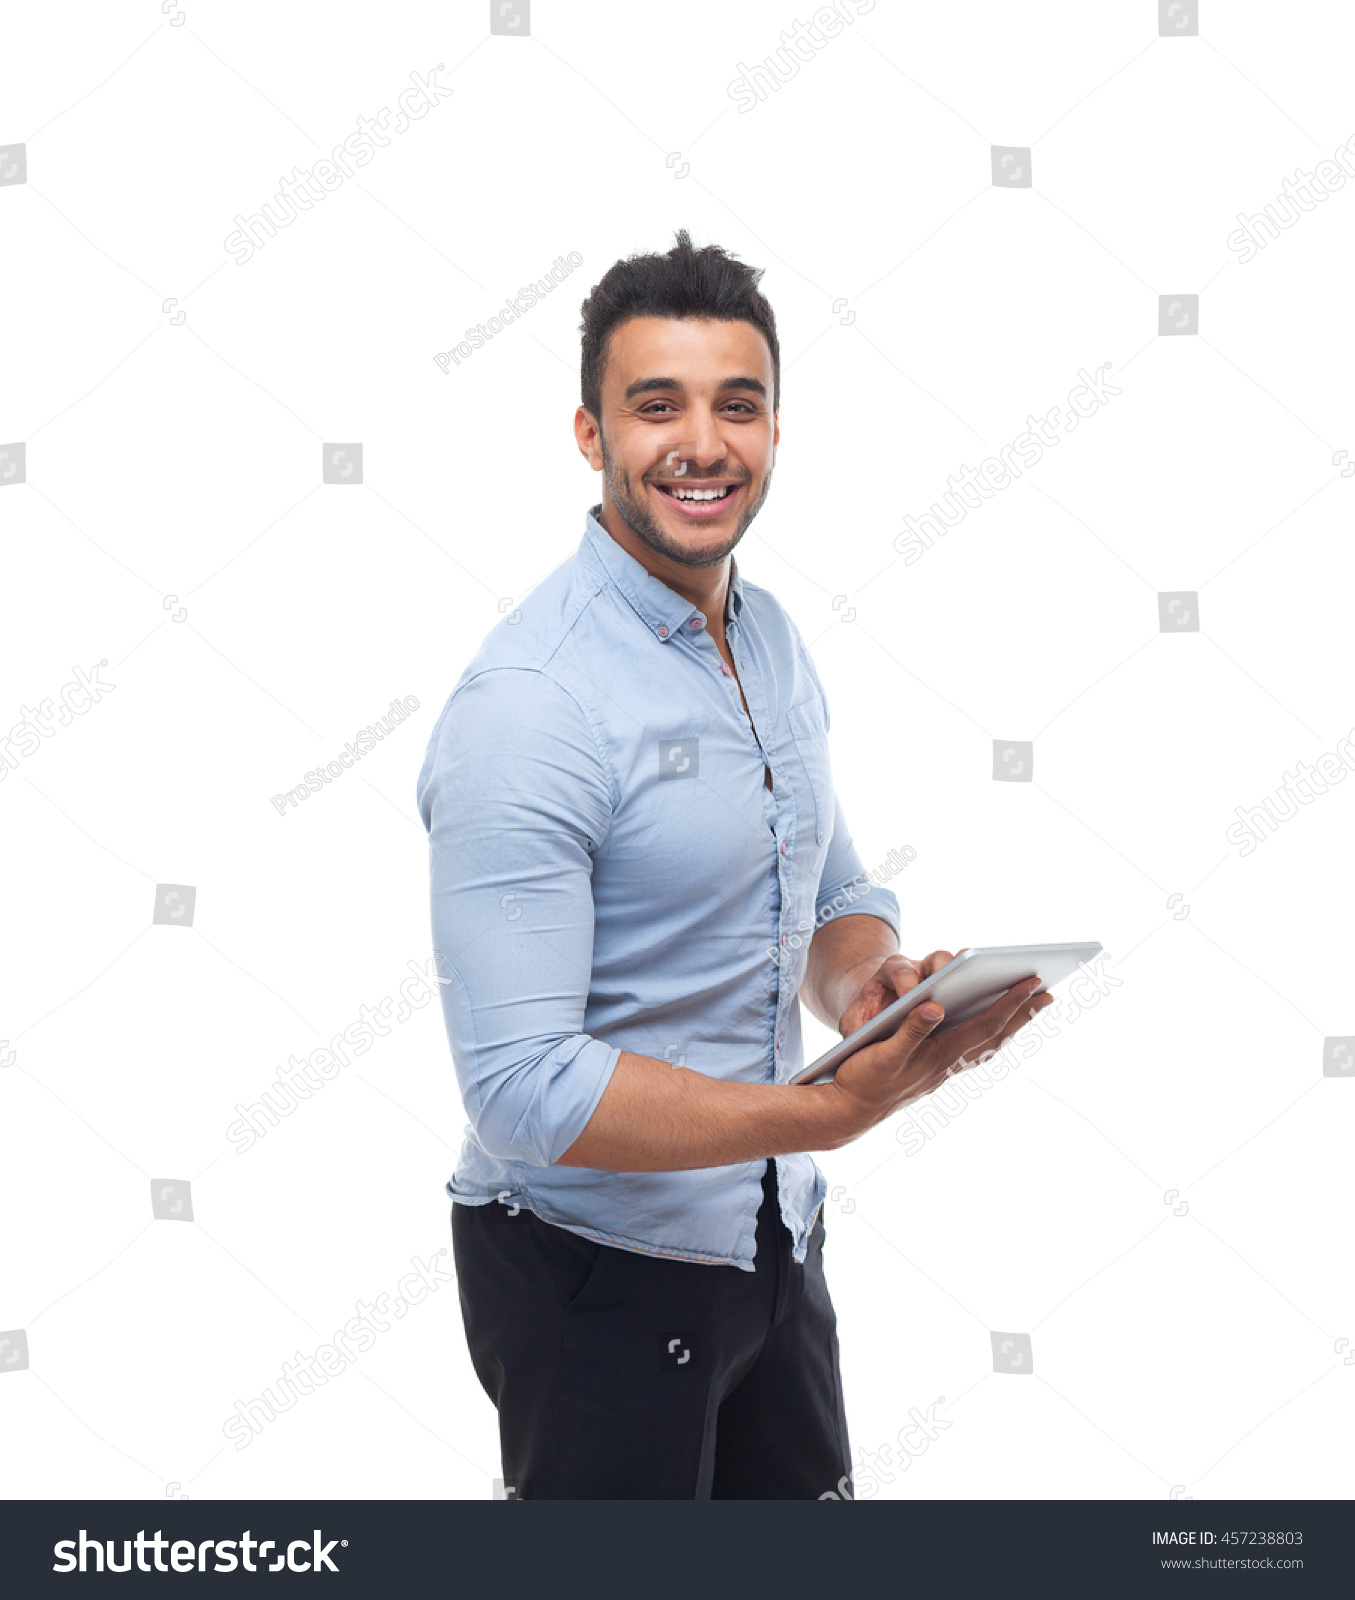 Handsome Business Man Happy Smile Businessman Stock Photo (Royalty ...